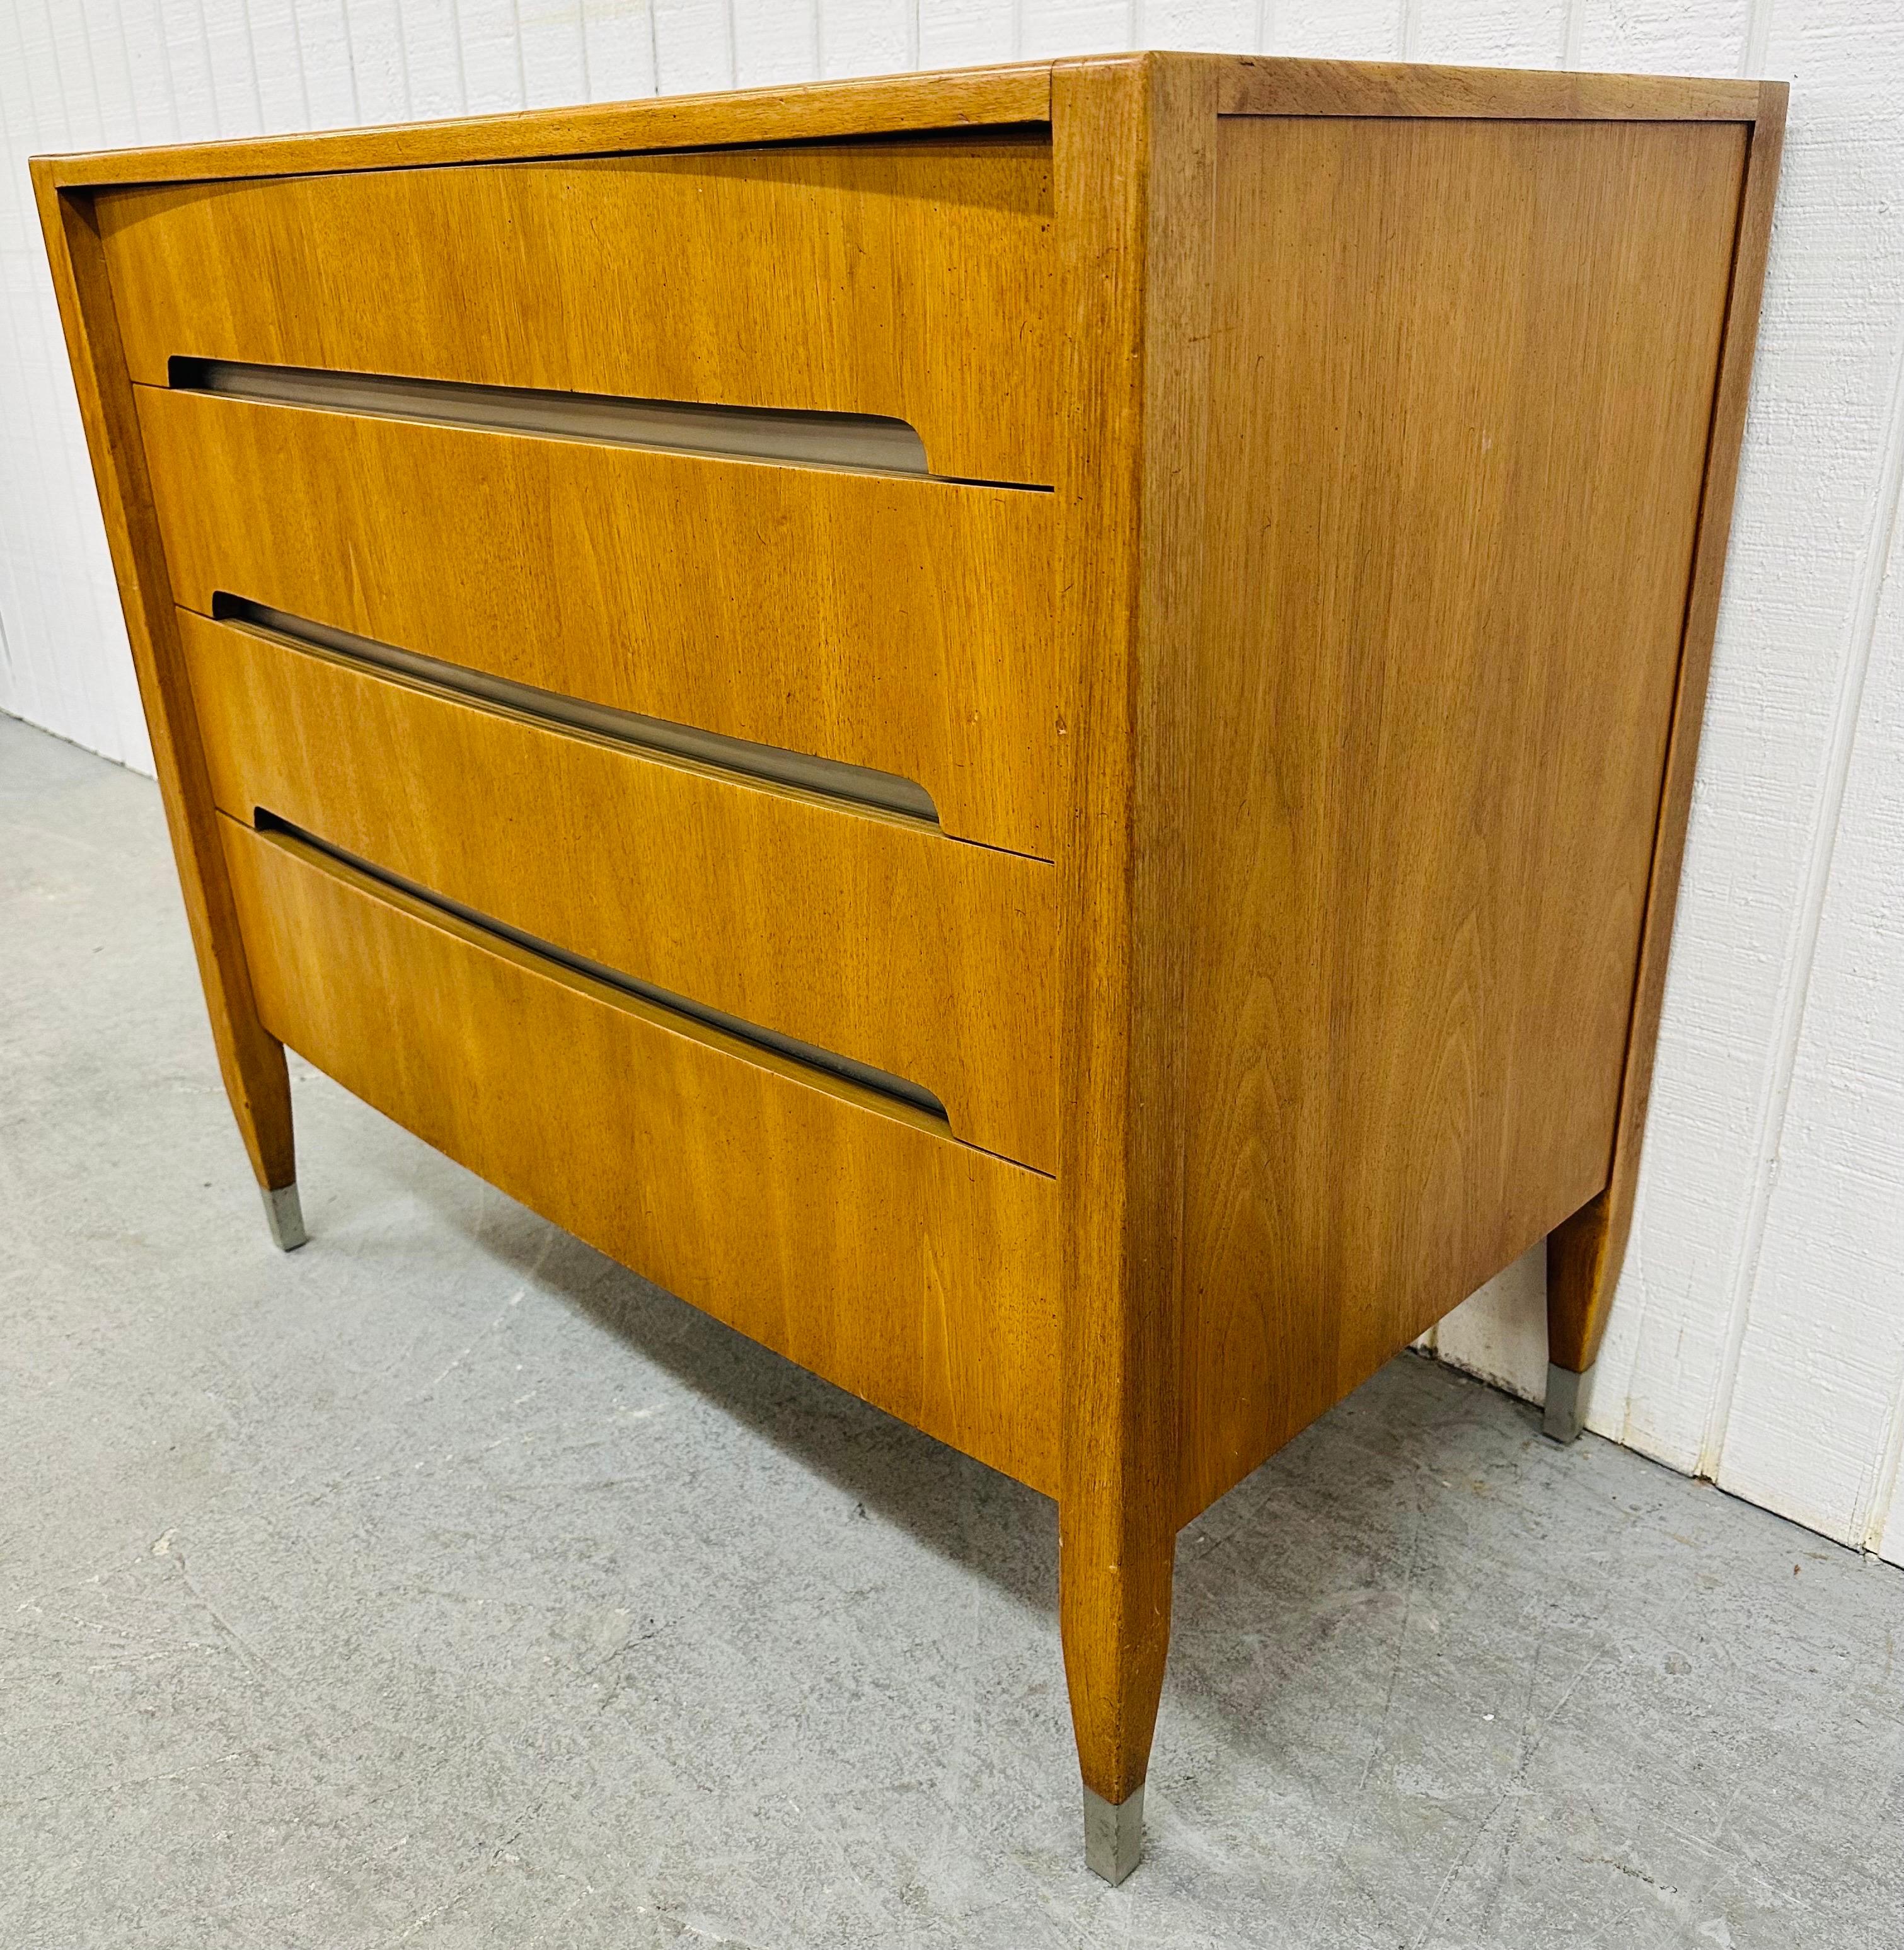 This listing is for a Mid-Century Modern Sligh Walnut Bachelor Chest. Featuring a straight line design, four drawers for storage, recessed handles, chrome trim with caps on the feet, and a beautiful walnut finish. This is an exceptional combination